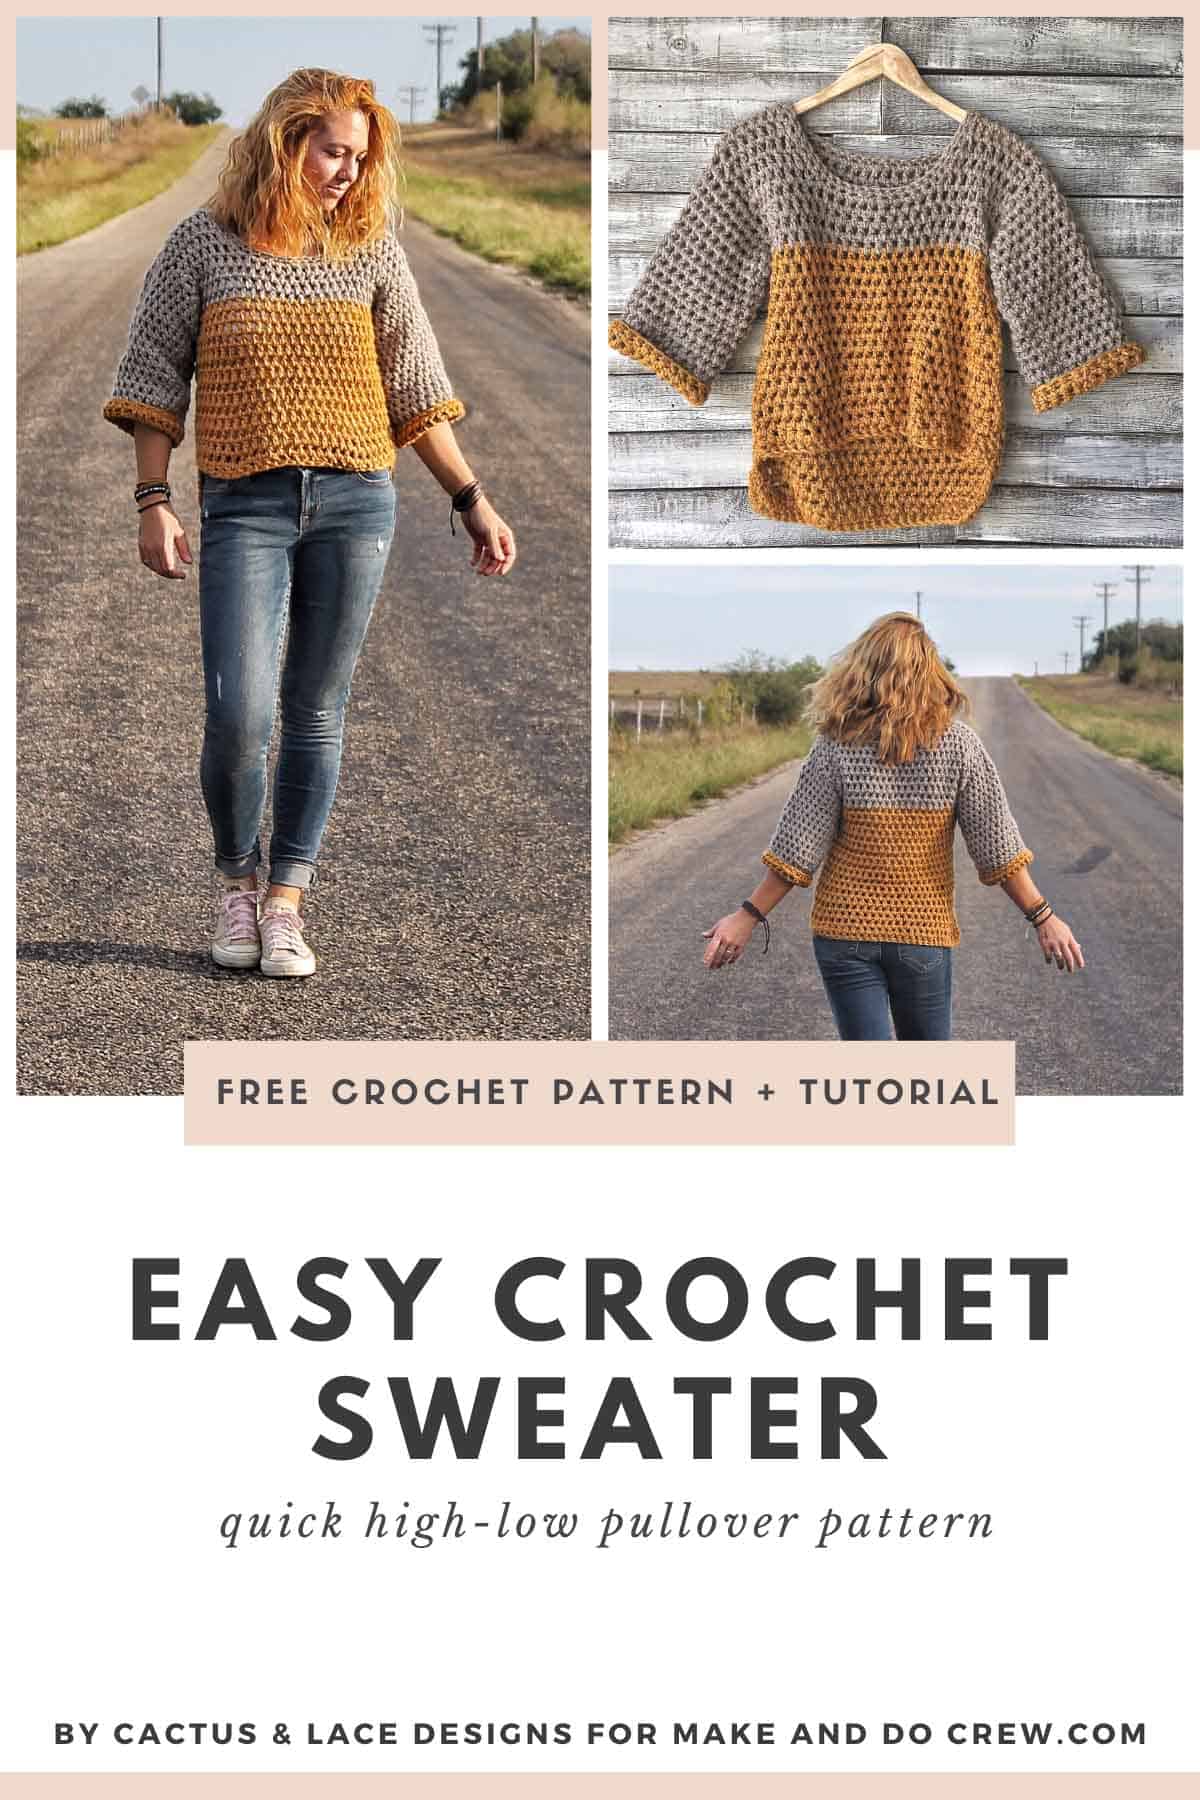 Free crochet pattern for an easy pullover cropped sweater with ¾ length sleeves using Lion Brand yarn. 